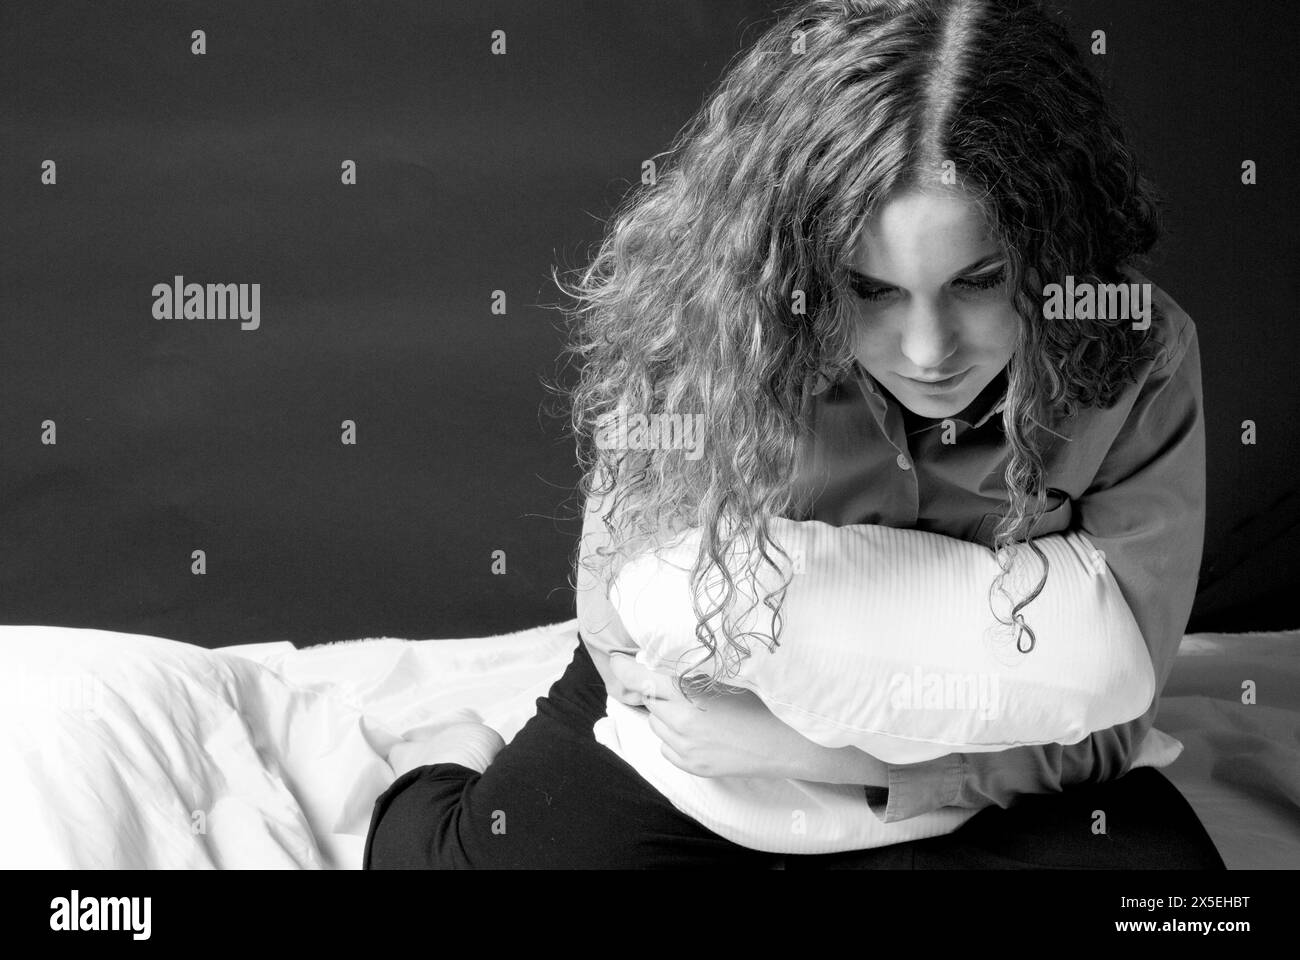 Young woman clutching a pillow to her stomach while sitting on bed, depicting the concept of stomachache or stomach cramps, USA. Stock Photo